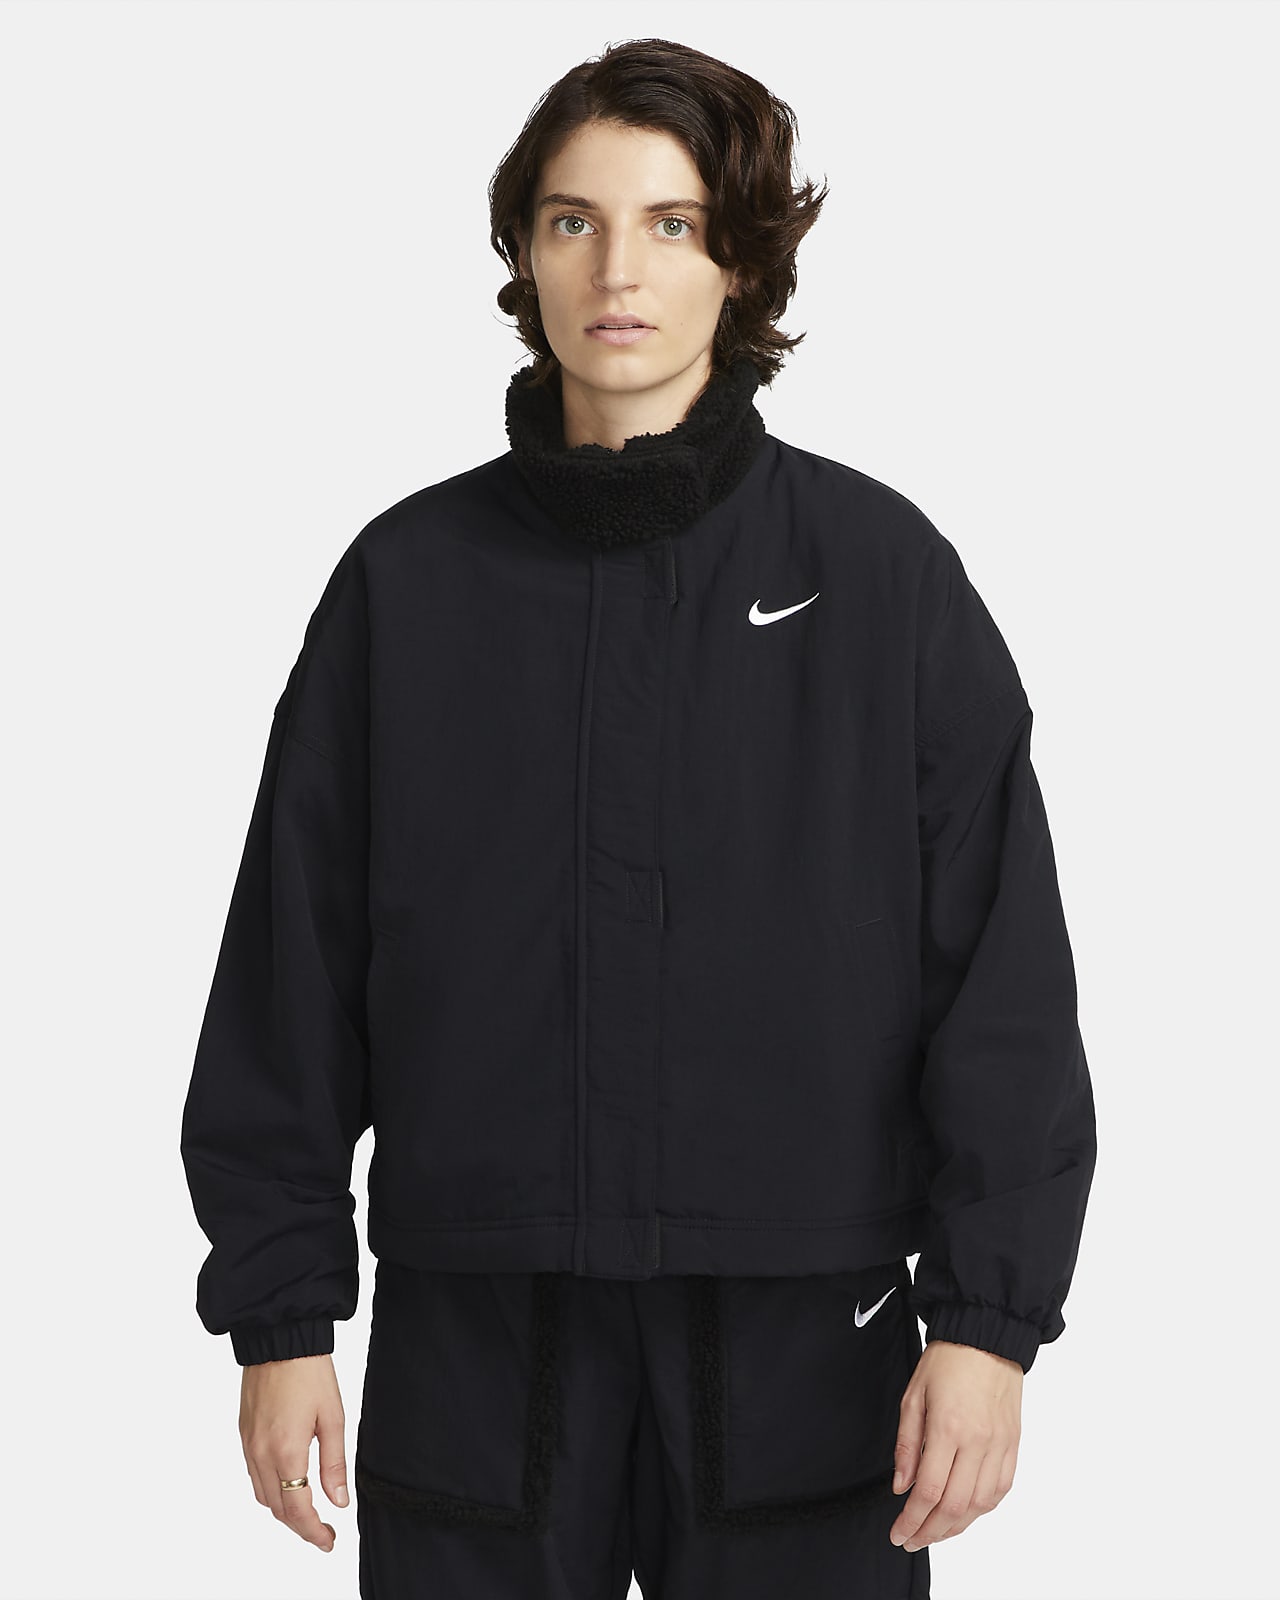 https://static.nike.com/a/images/t_PDP_1280_v1/f_auto,q_auto:eco/1d1ae59c-c976-4a99-9b7b-1507468676ab/sportswear-essential-woven-fleece-lined-jacket-DqbcsP.png